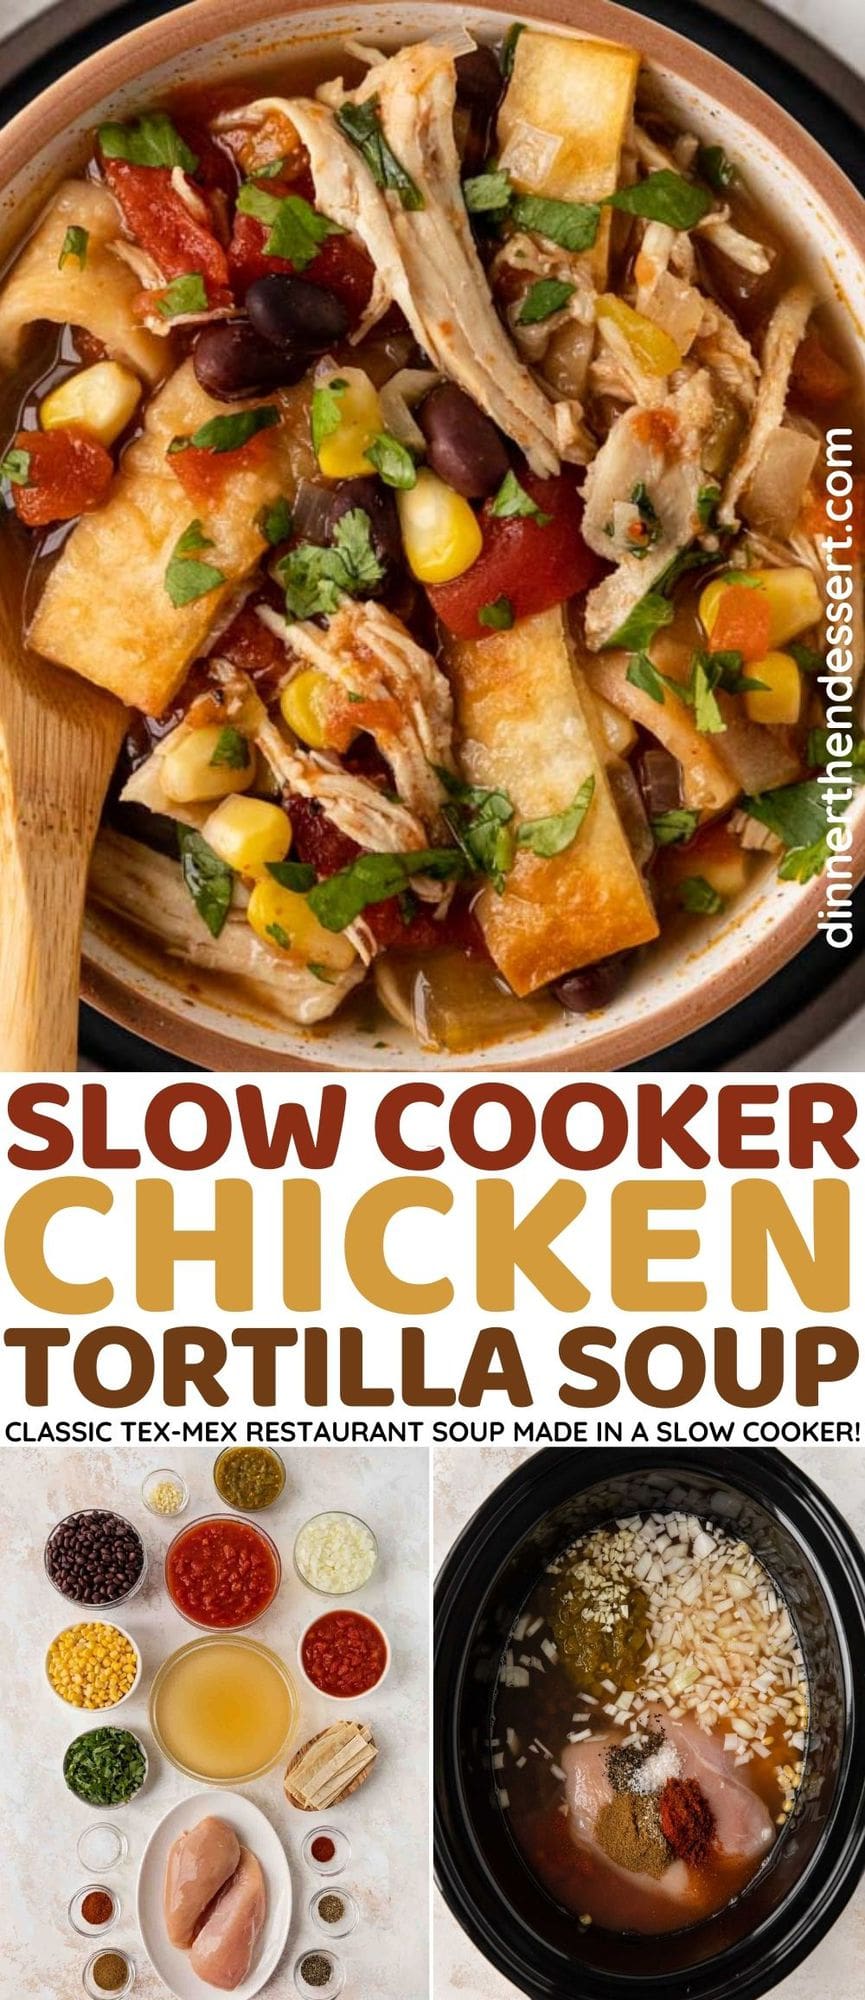 Slow Cooker Chicken Tortilla Soup in bowl with wooden spoon and preparation collage